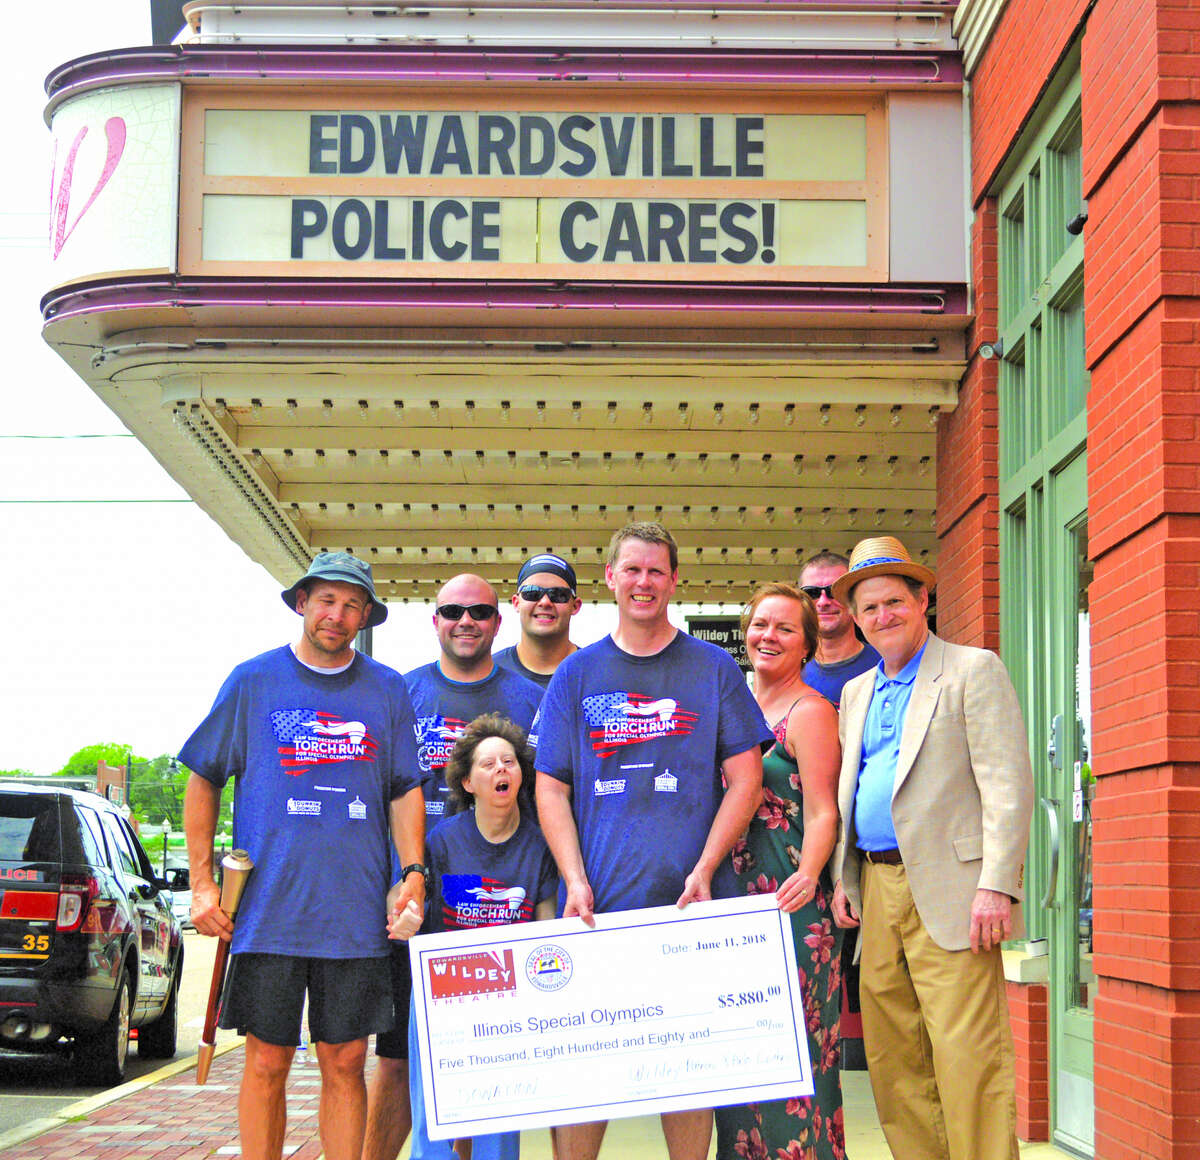 The Wildey Theater made a check presentation for $5,880 for Special Olympics to the Edwardsville Police Department on Monday afternoon during the Special Olympics Torch Run. From left to right are Edwardsville police officers Justin Towell and Mark Lask, Special Olympics athlete Lisa Newbury, Edwardsville police officers Jackson Nolan and Mike Fillback, Wildey Theater assistant manager Janel Ellsworth, Edwardsville police dispatcher James Henghold and Wildey Theatre manager Al Canal.